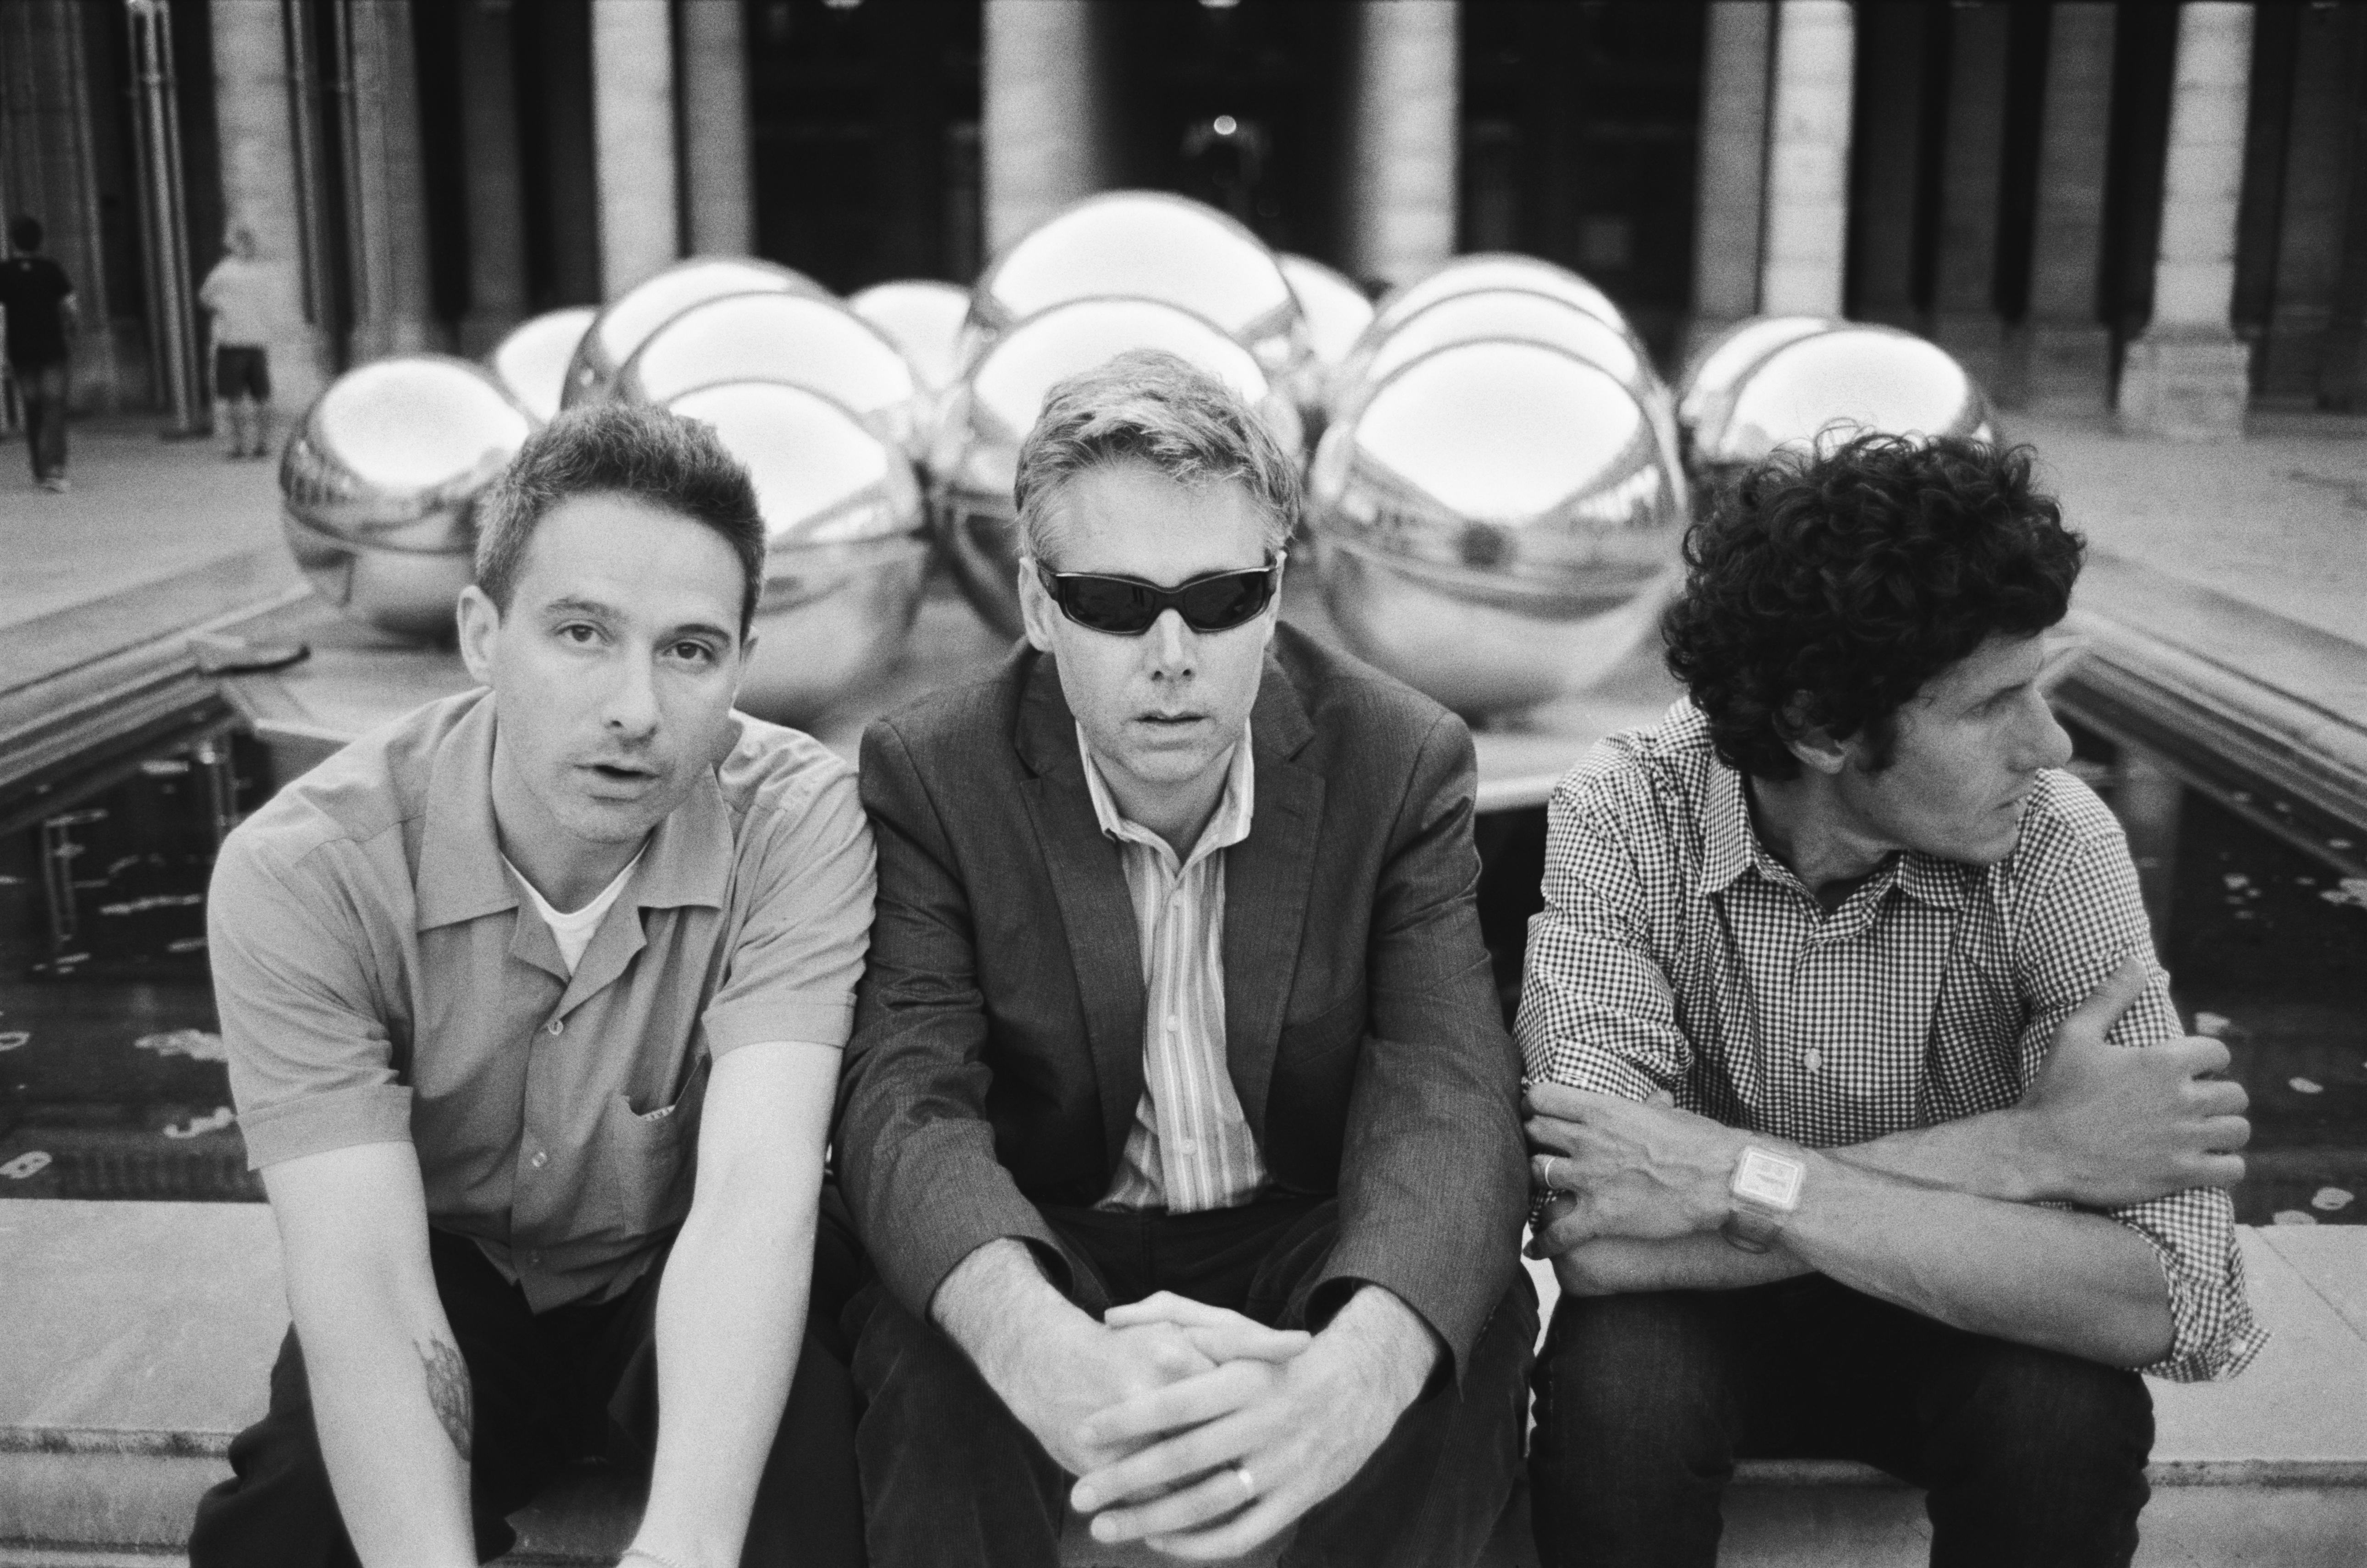 Beastie Boys Limited Edition Check Your Head Box Set Announced For June 2022 Release